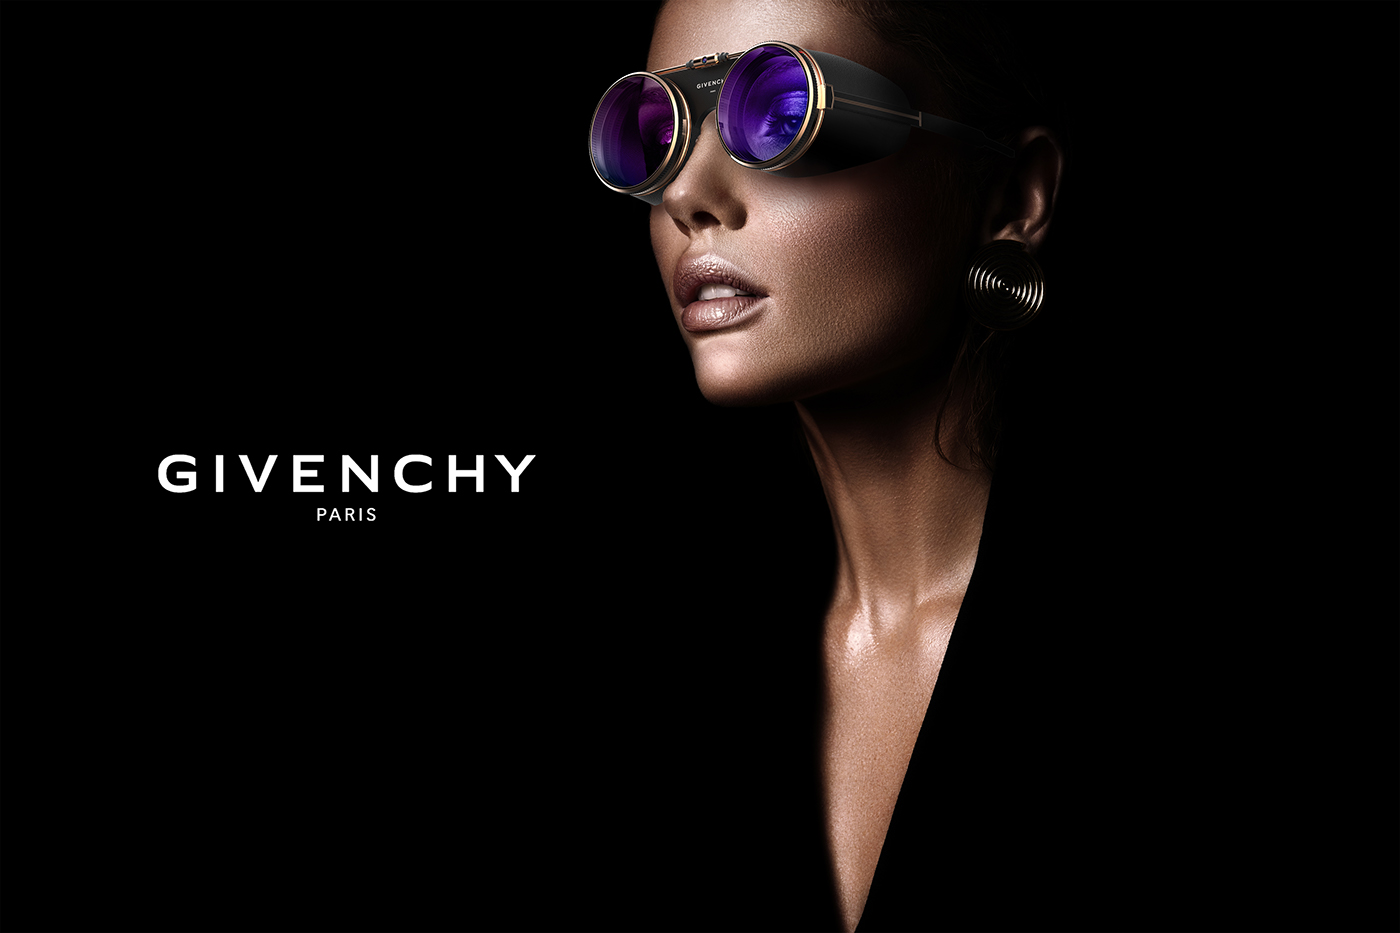 vr givenchy Fashion  AR glasses Sunglasses Wearable concept